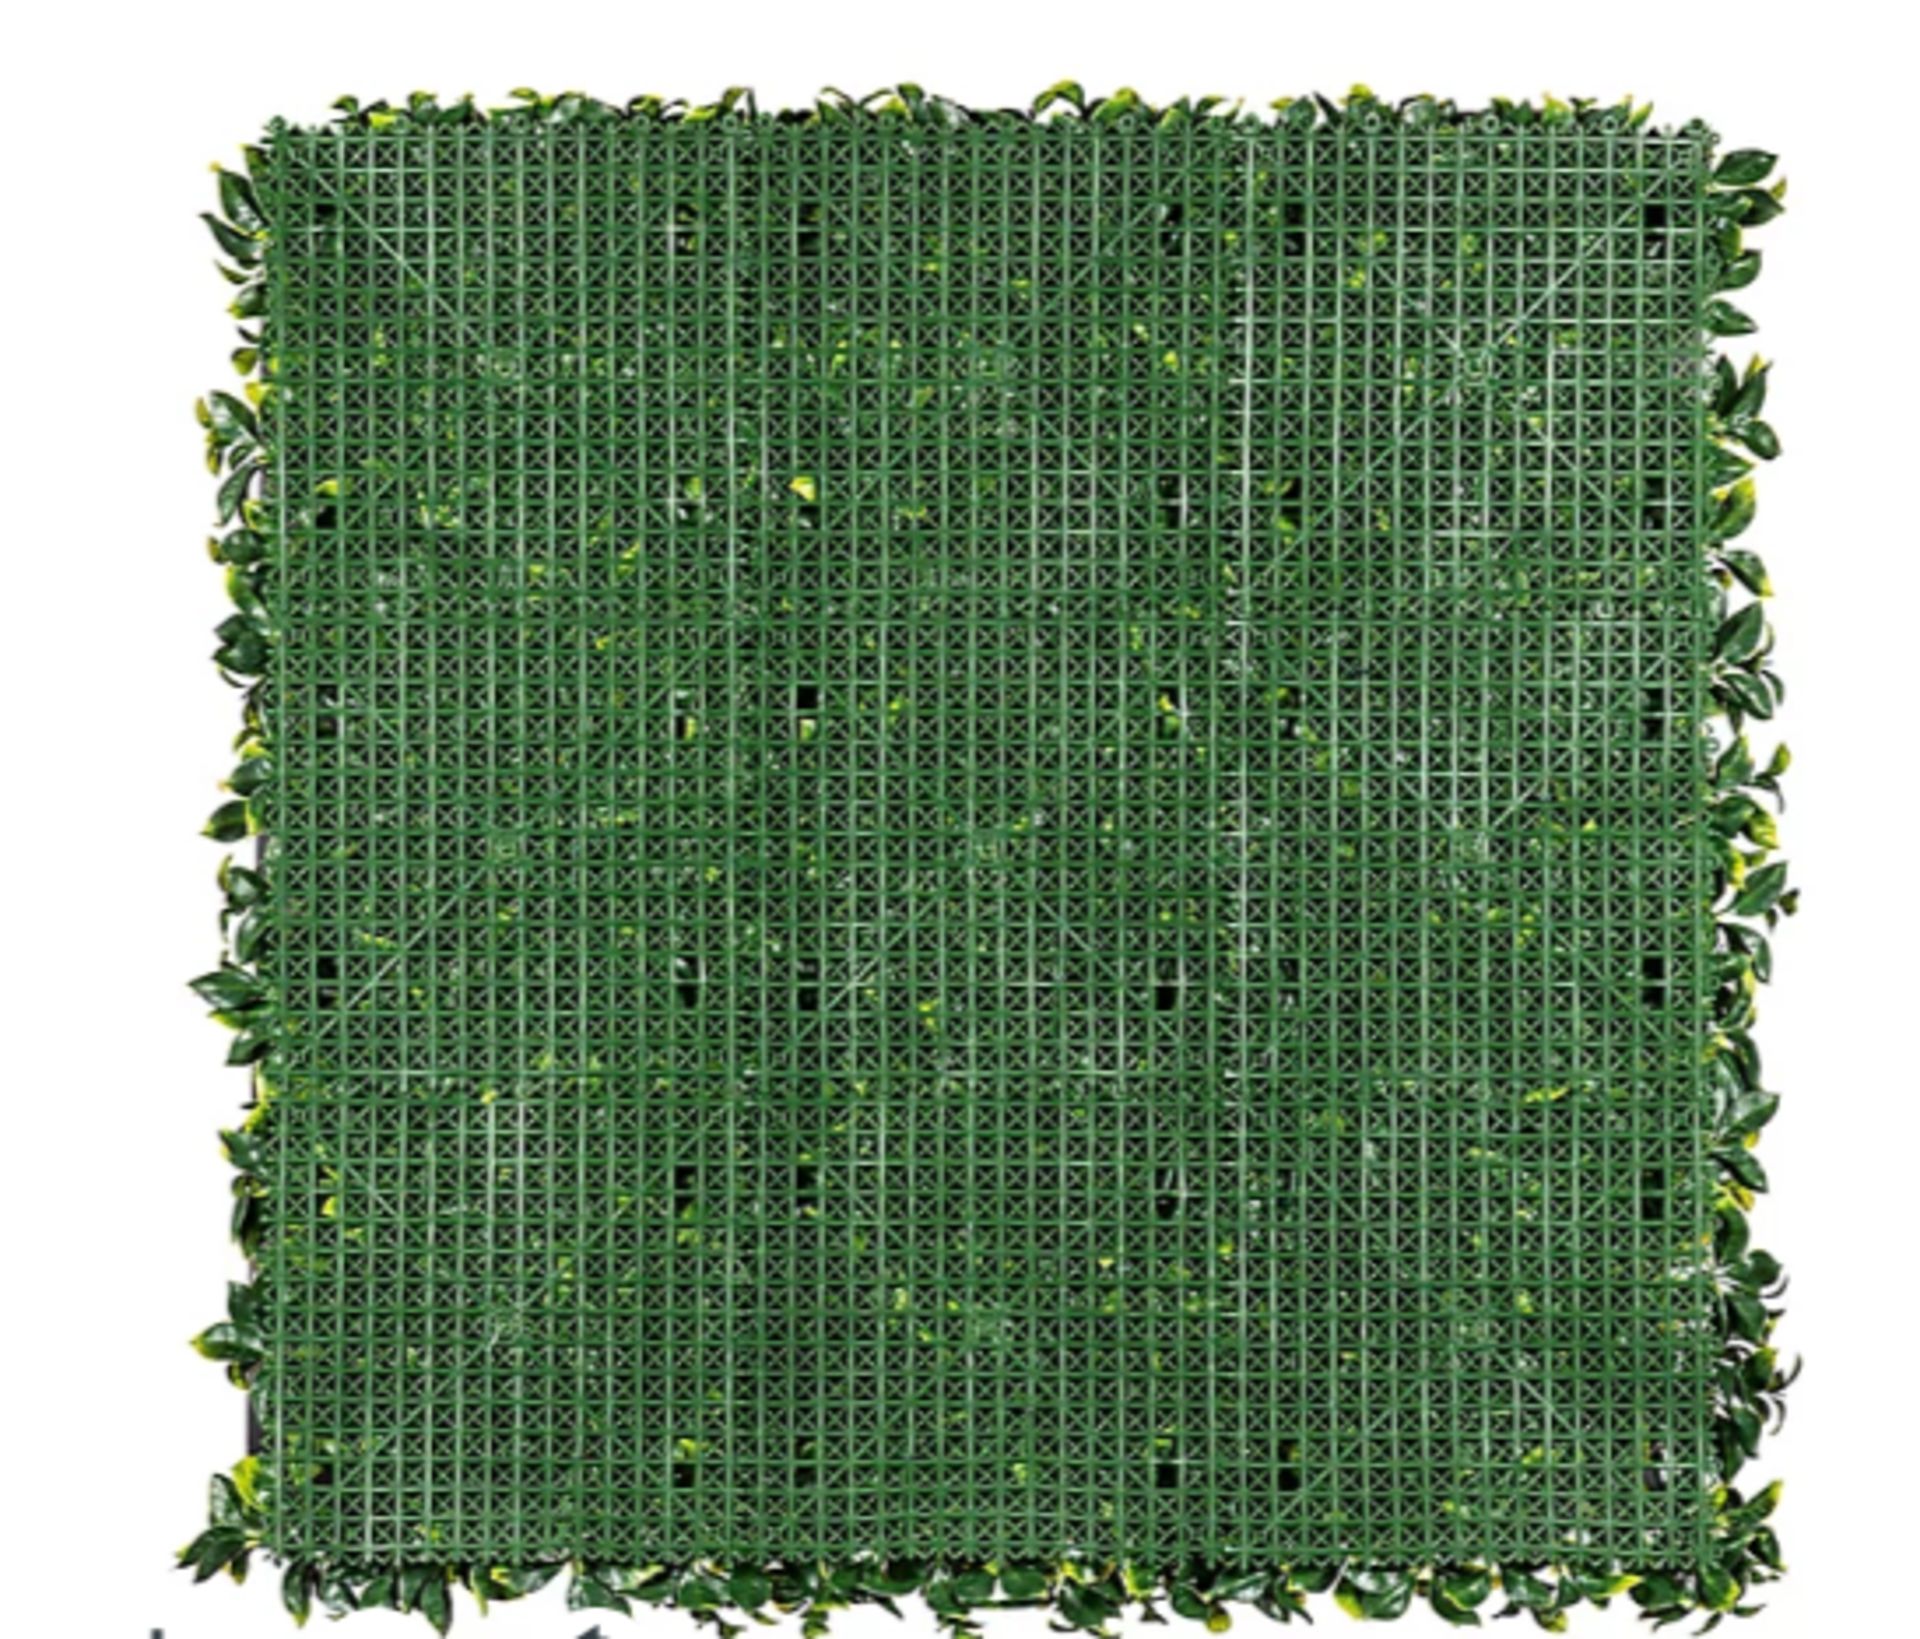 BRAND NEW JASMINE SQUARE ARTIFICIAL PLANT WALL, (H)1M (W)1M - Image 3 of 3